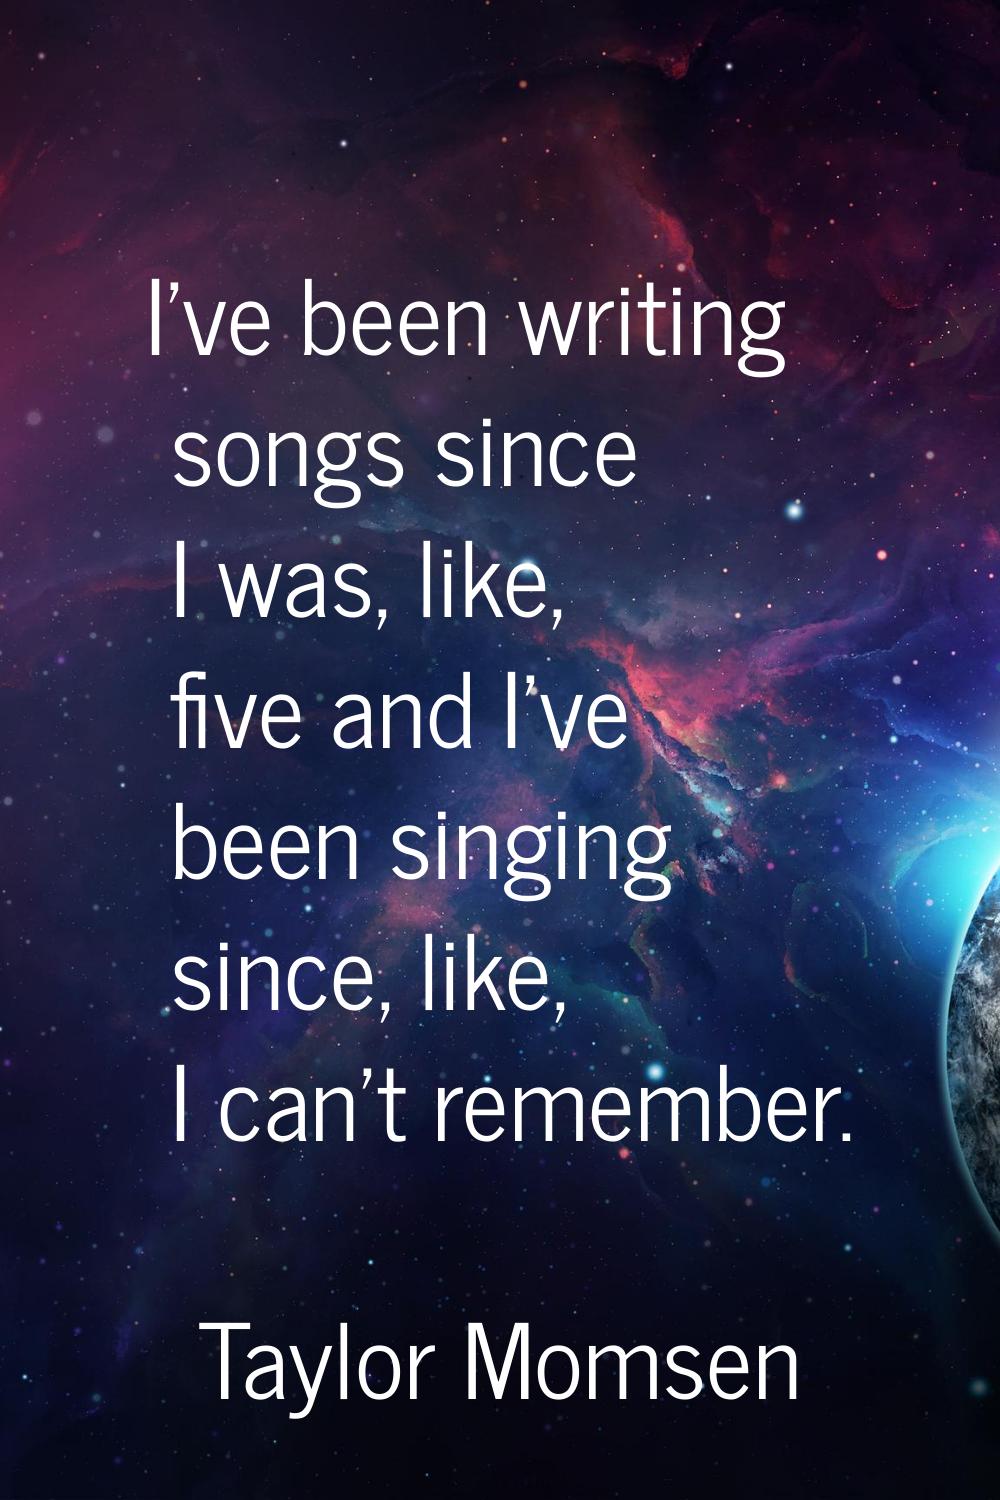 I've been writing songs since I was, like, five and I've been singing since, like, I can't remember